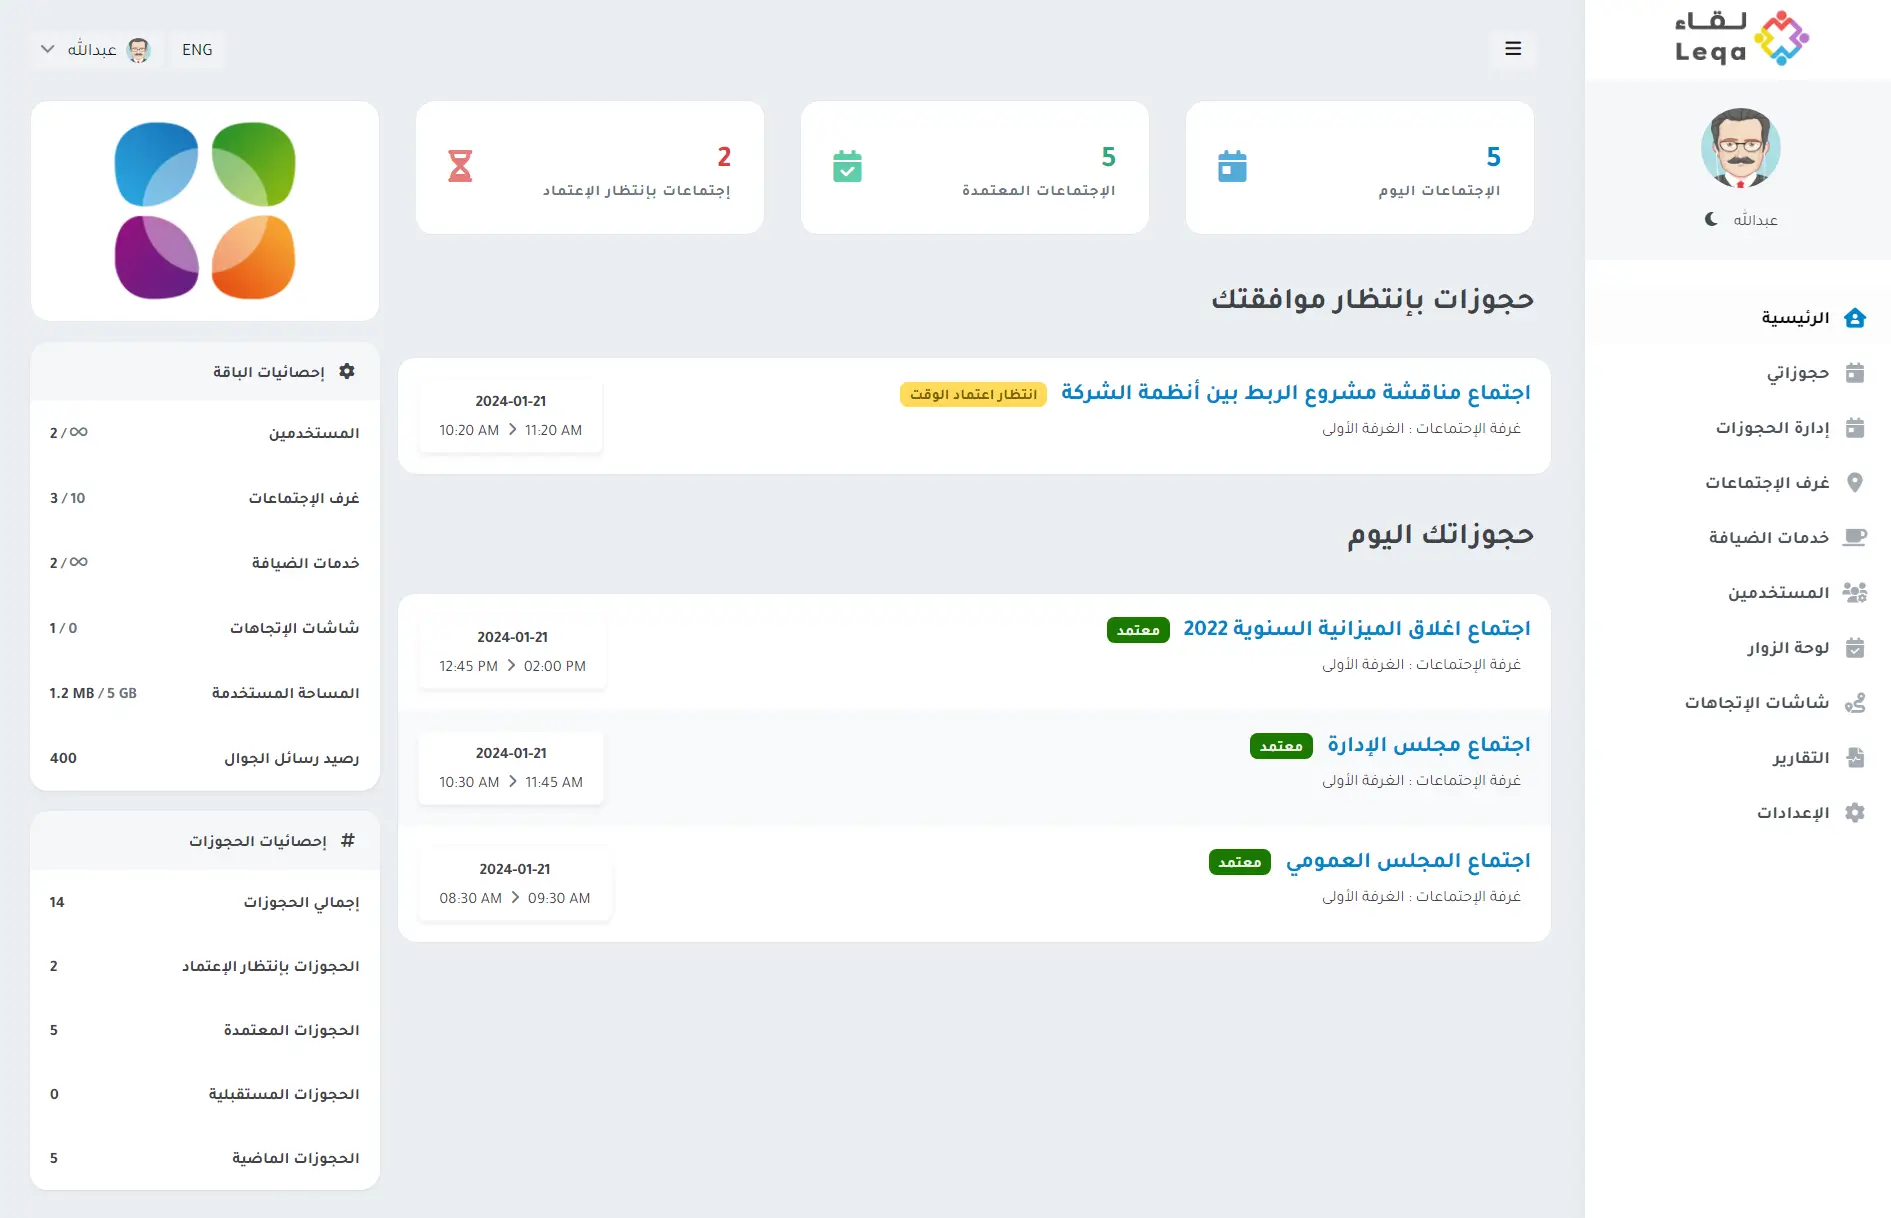 Overview of Leqa Interface